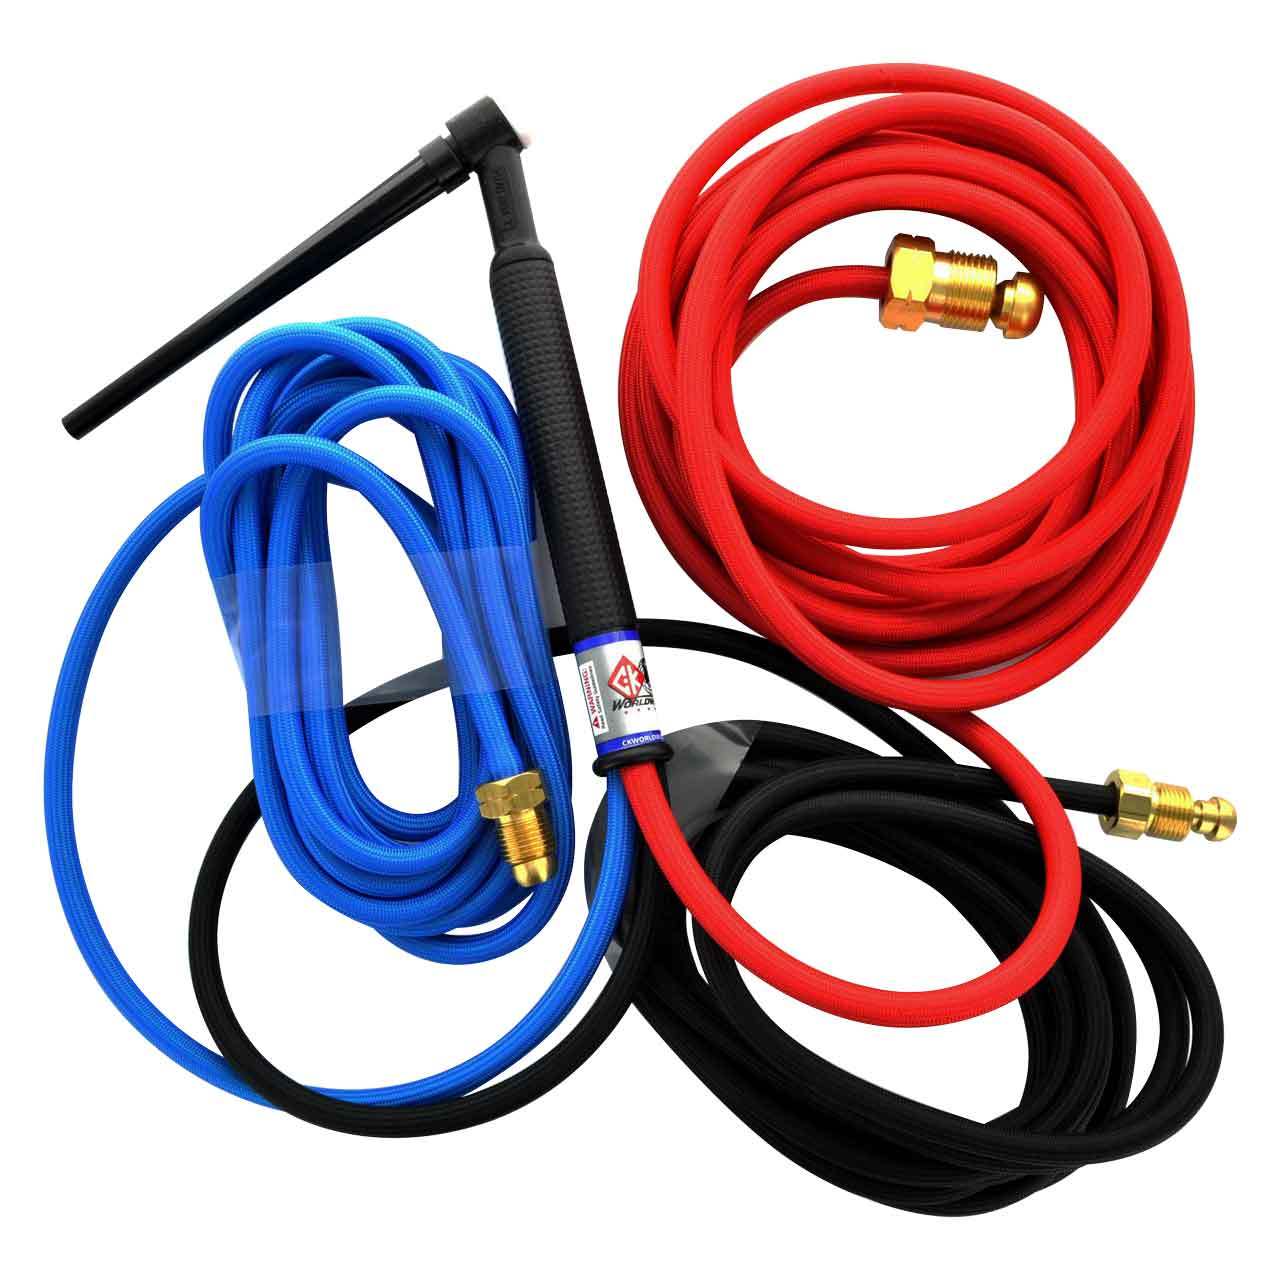 CK20 Water Cooled TIG Torch Kit